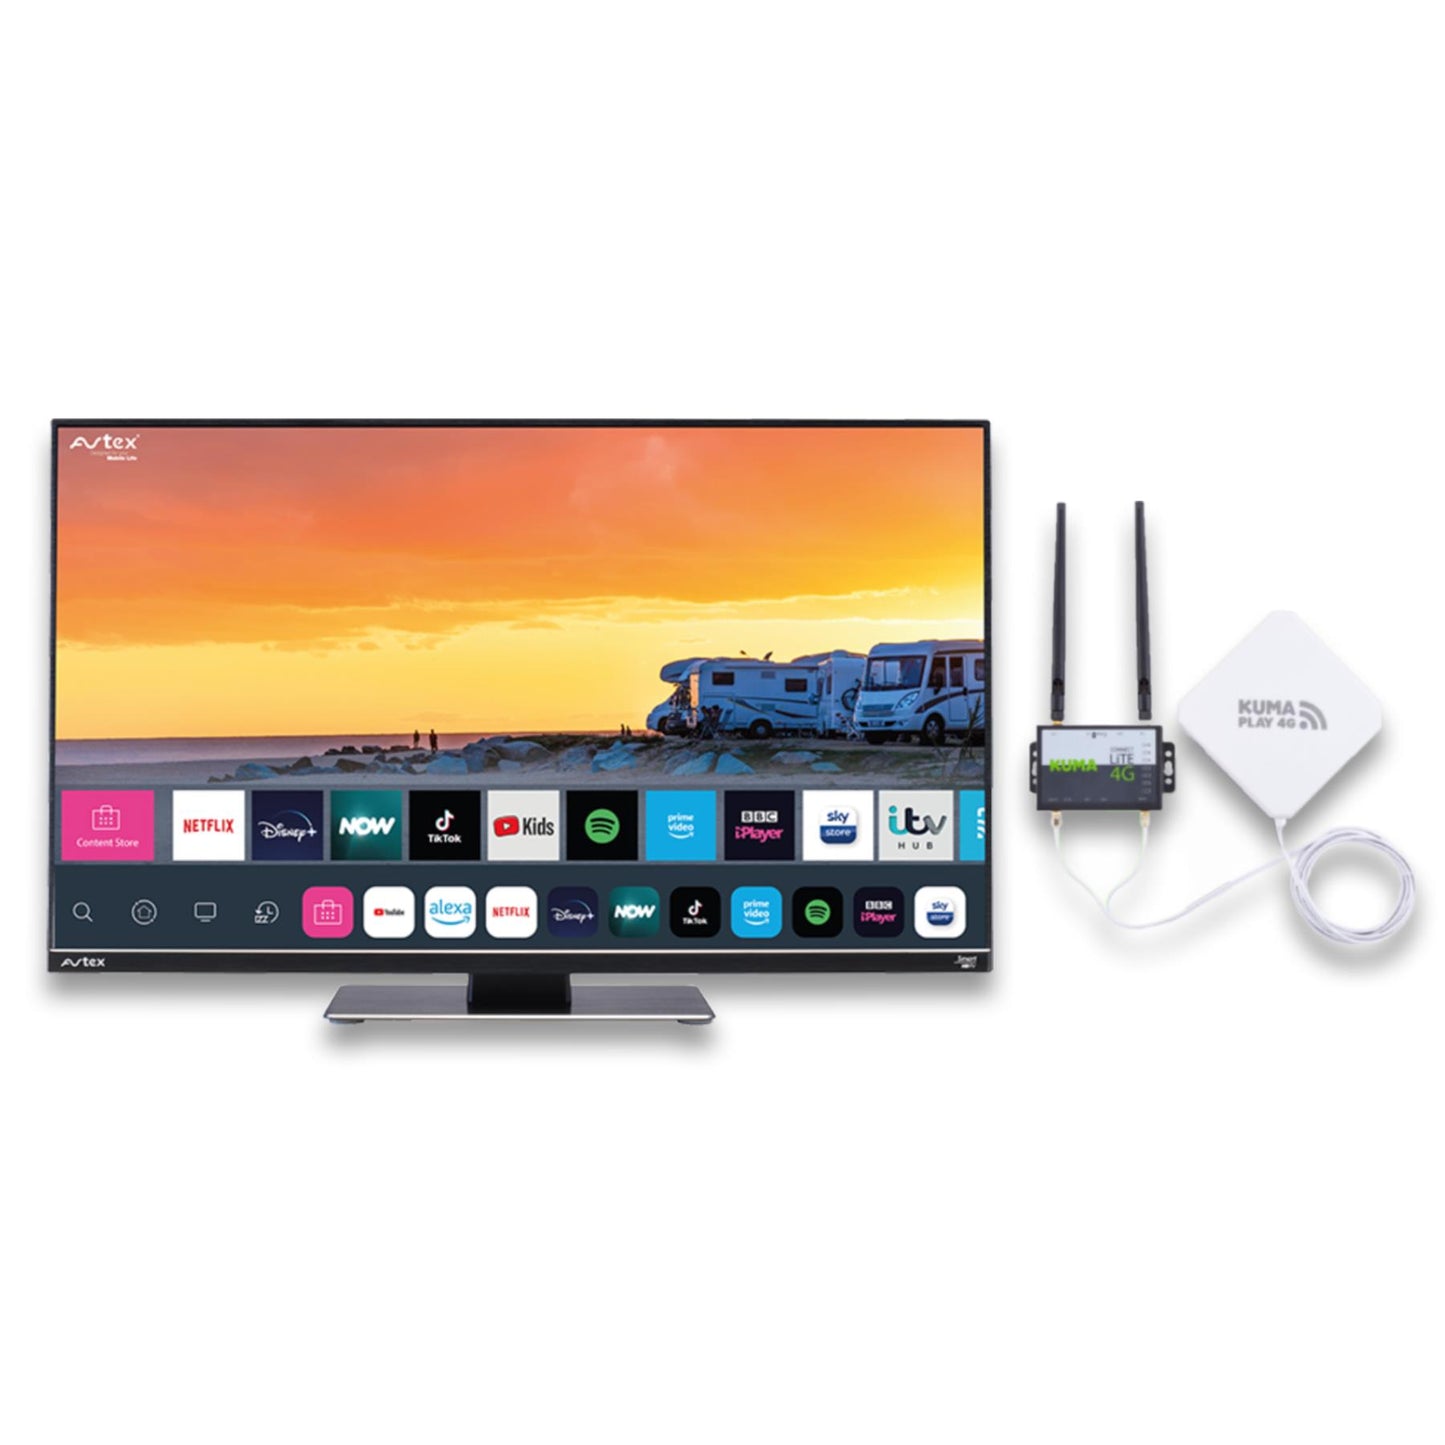 AVTEX W215TS 21.5" Smart TV & KUMA CONNECT PLAY Kit - 12v 21.5 inch Super Slim LED Wifi Bluetooth Full HD Television & SIM Unlocked 4G Router & Indoor Antenna Booster with Netflix Amazon Prime YouTube